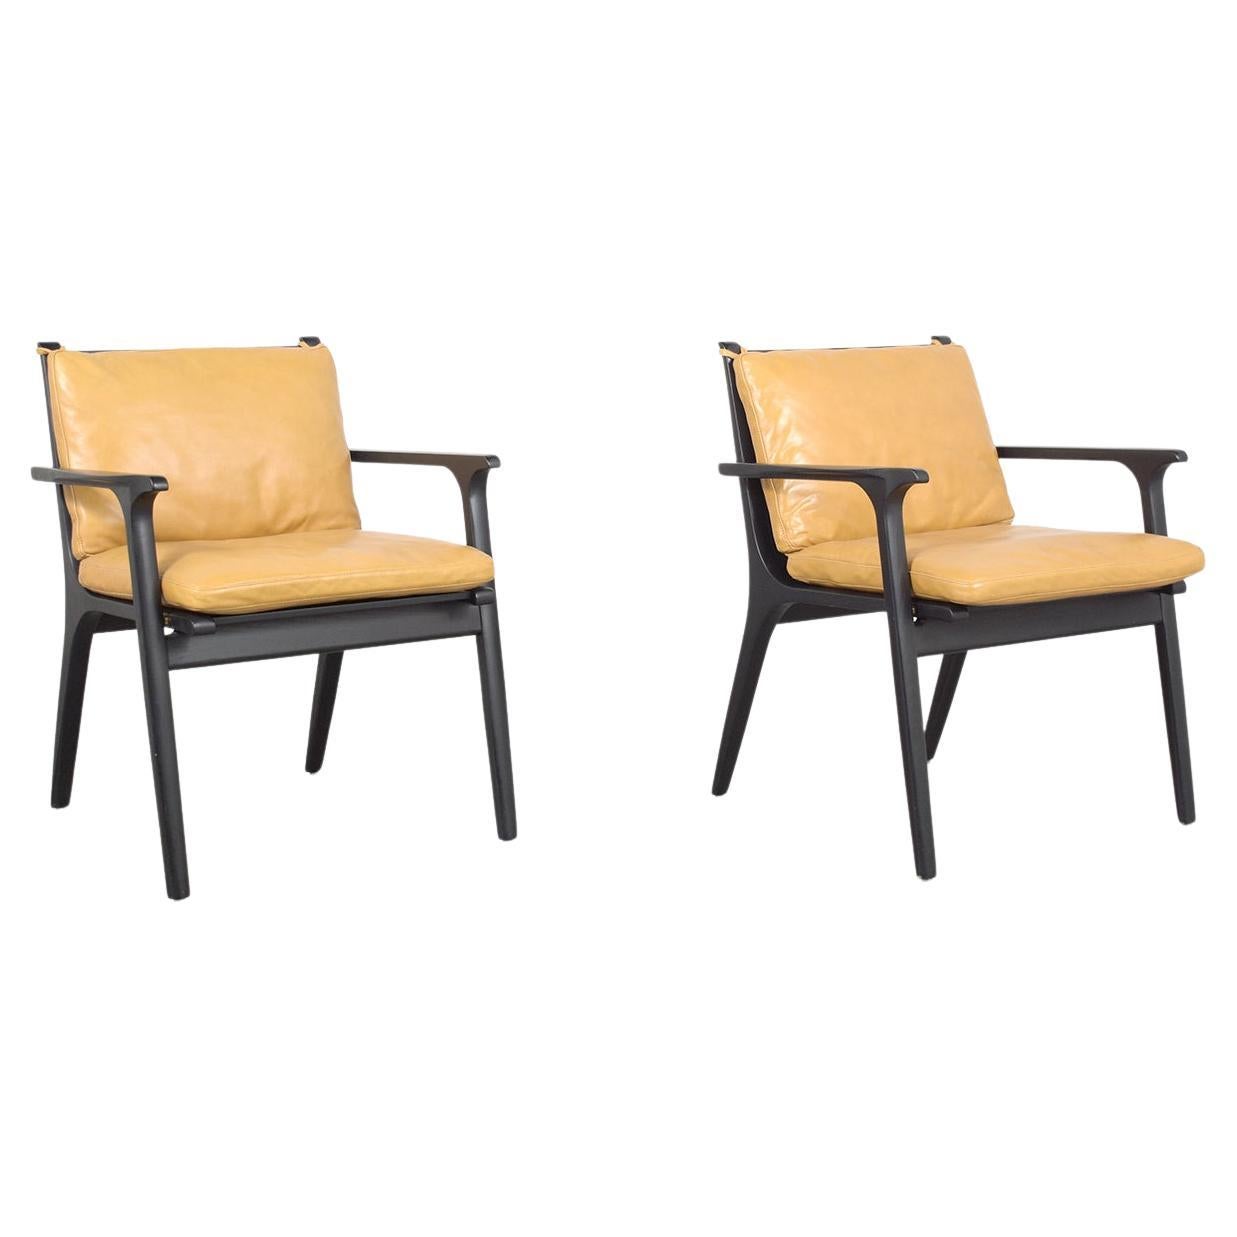 Modern Leather Armchairs: Mustard Yellow Upholstery with Black Oak Frame